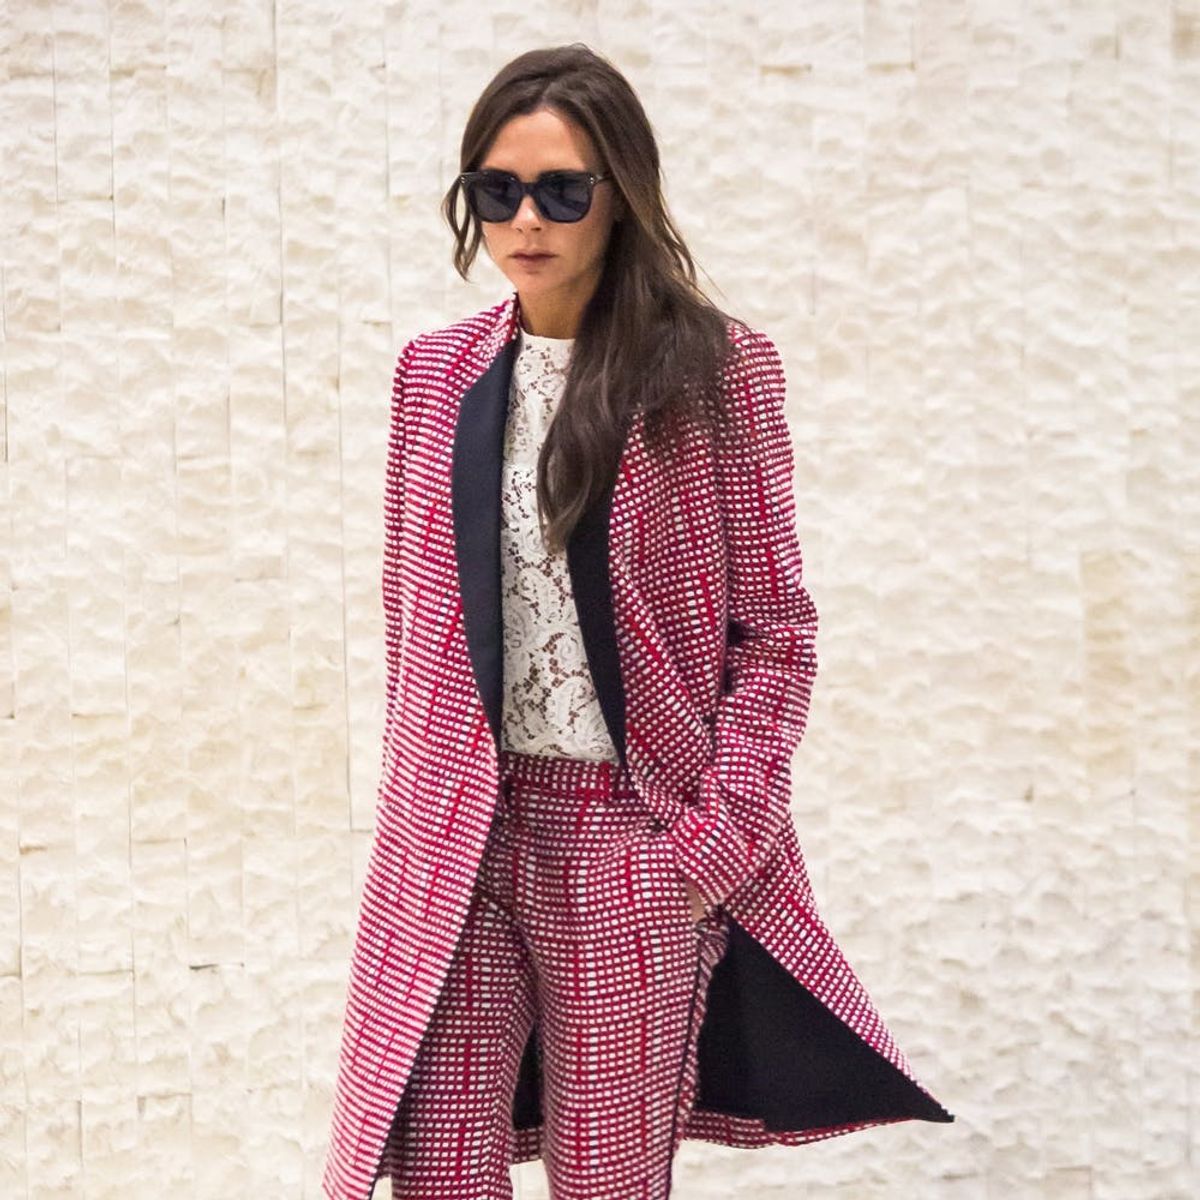 13 Style Lessons We Learned from Victoria Beckham